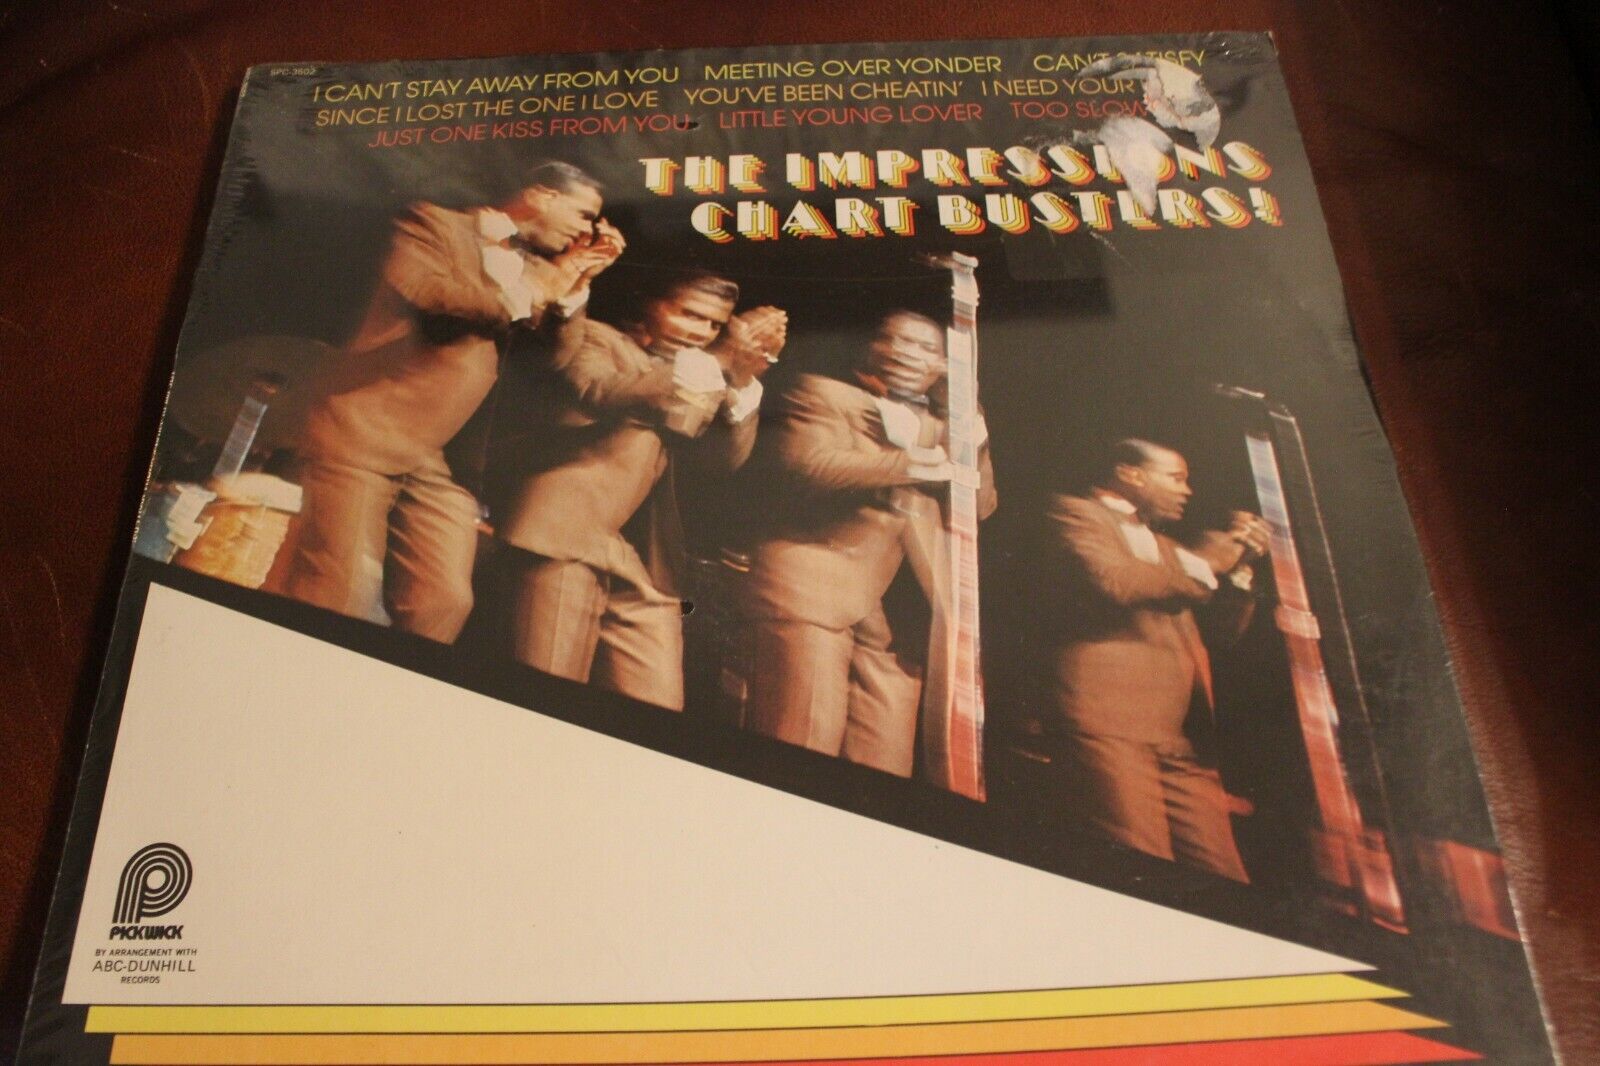 The Impressions Chart Busters Pickwick LP-SPC 3502 1974 Factory SEALED